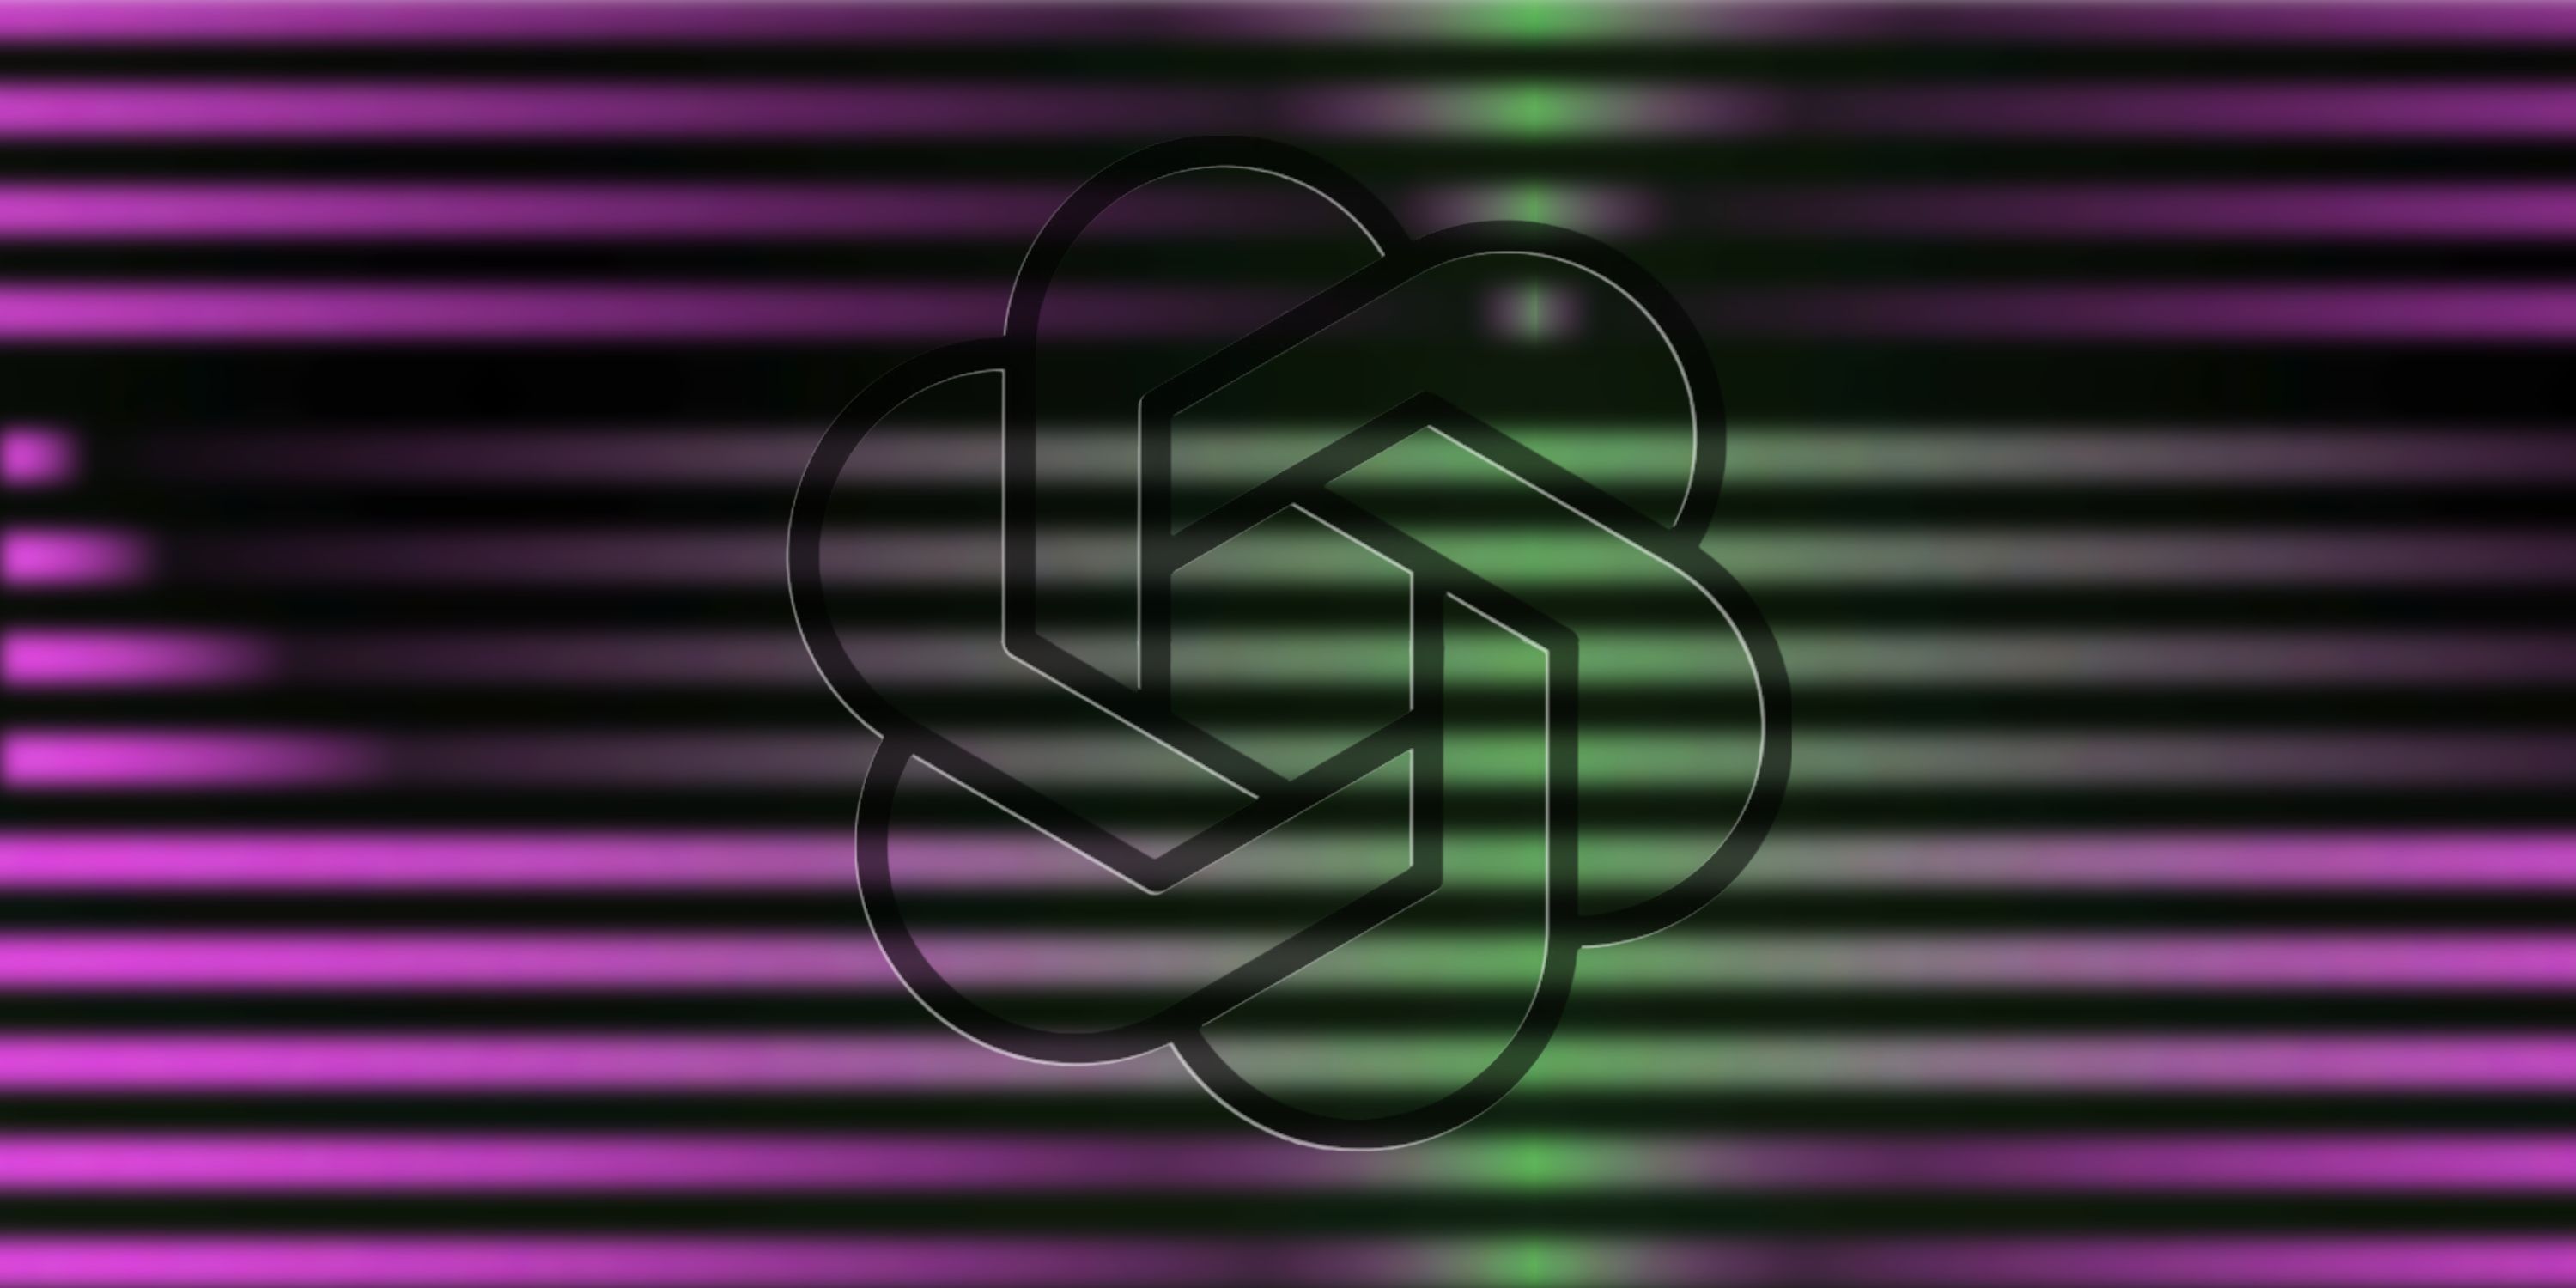 The OpenAI logo in black is superimposed over a purple, green, and black striped background